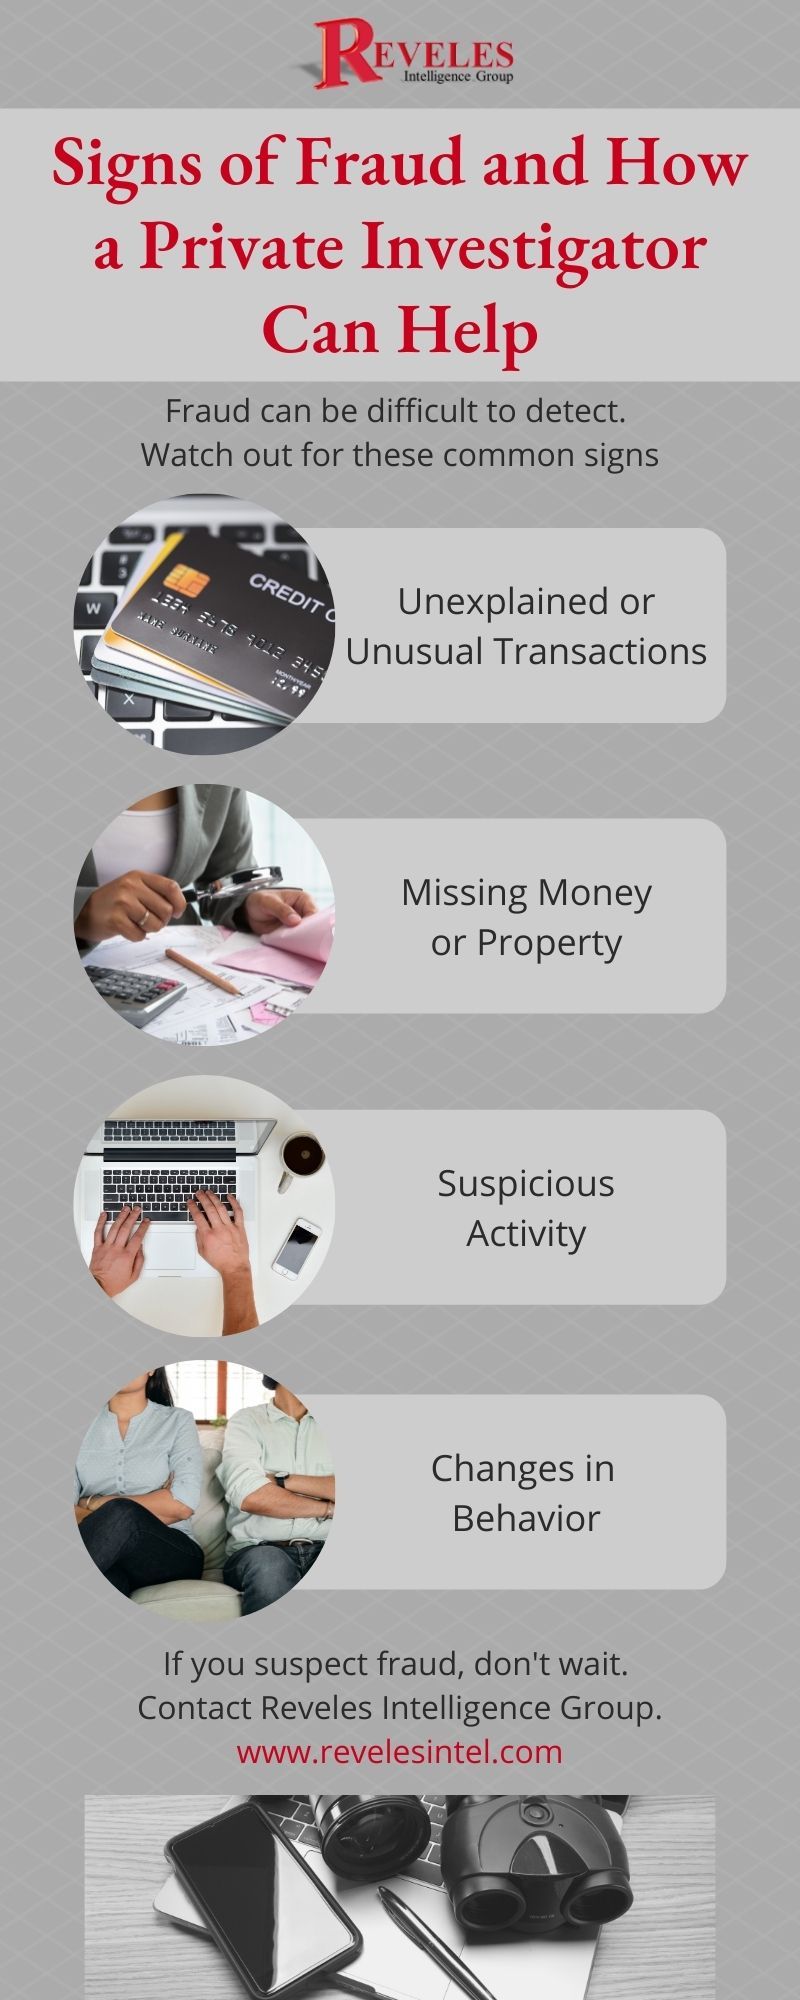 M16263 - Reveles Intelligence Group - Signs of Fraud and How a Private Investigator Can Help Infographic.jpg